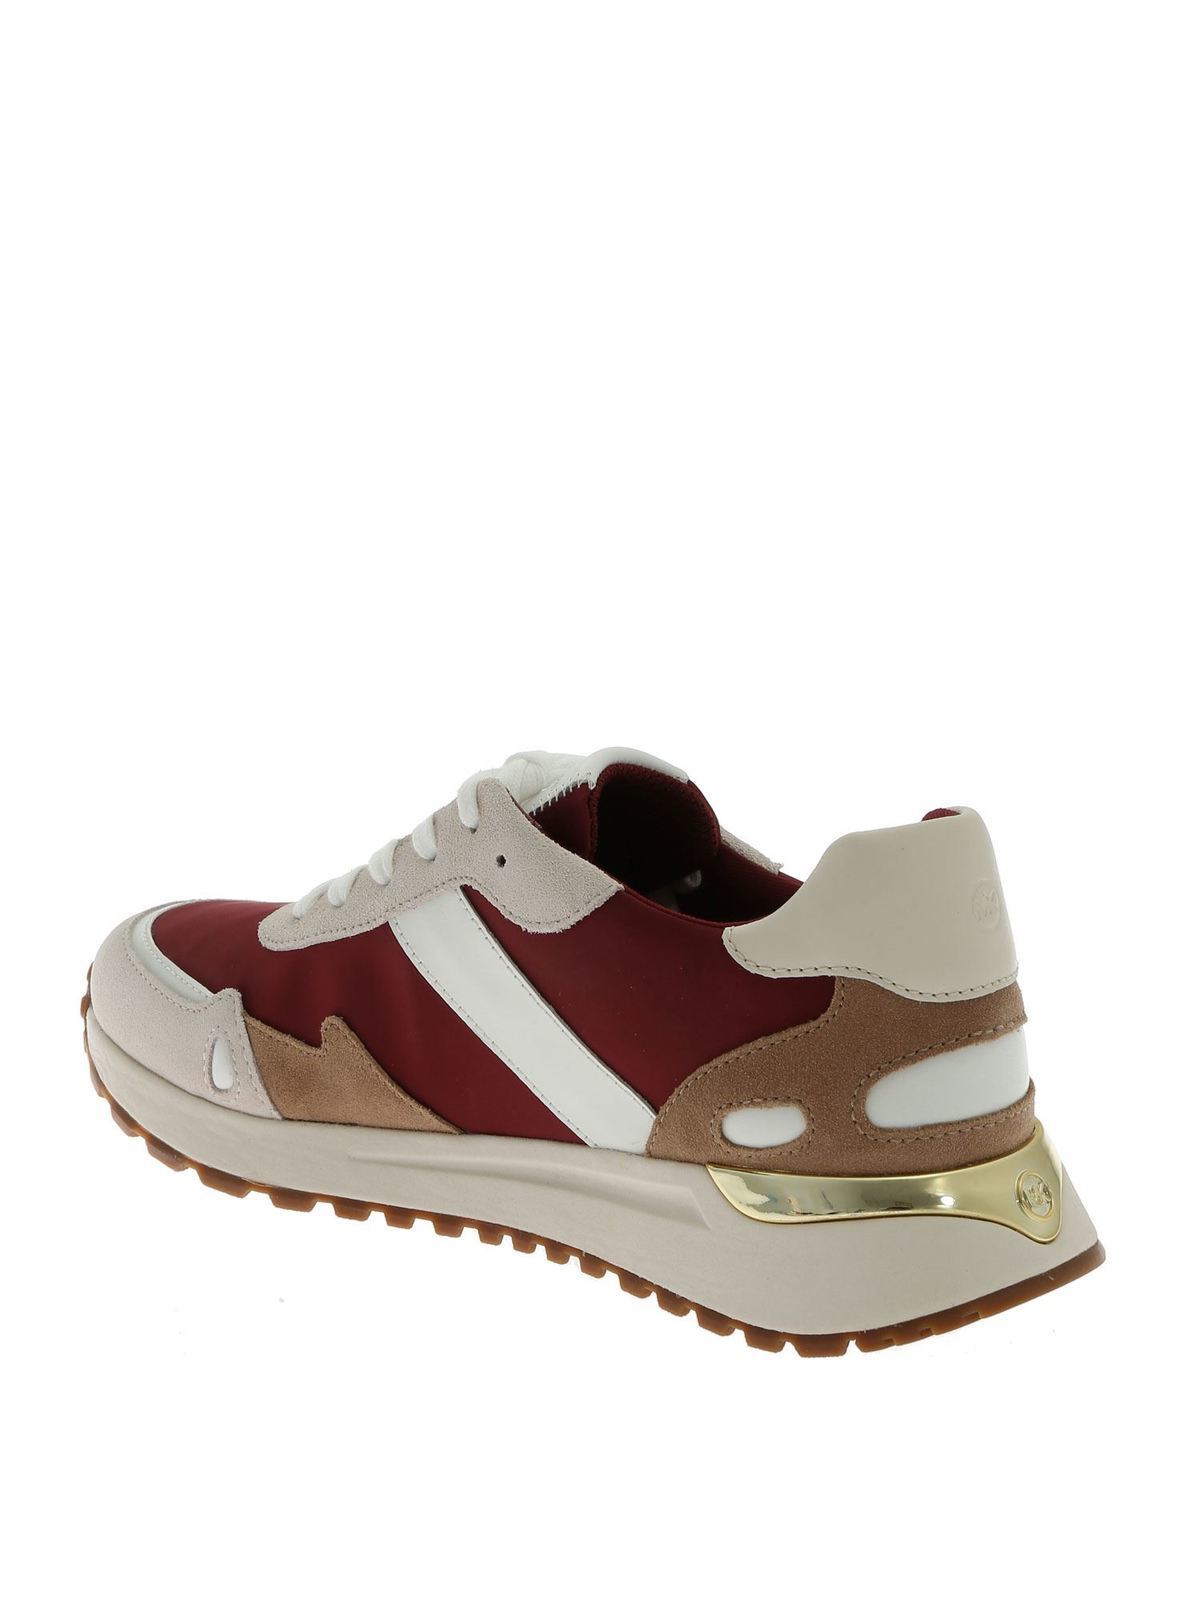 Loose difference Stereotype Trainers Michael Kors - Monroe Trainer sneakers in burgundy and ecrù -  43F9MOFS7DBRANDY